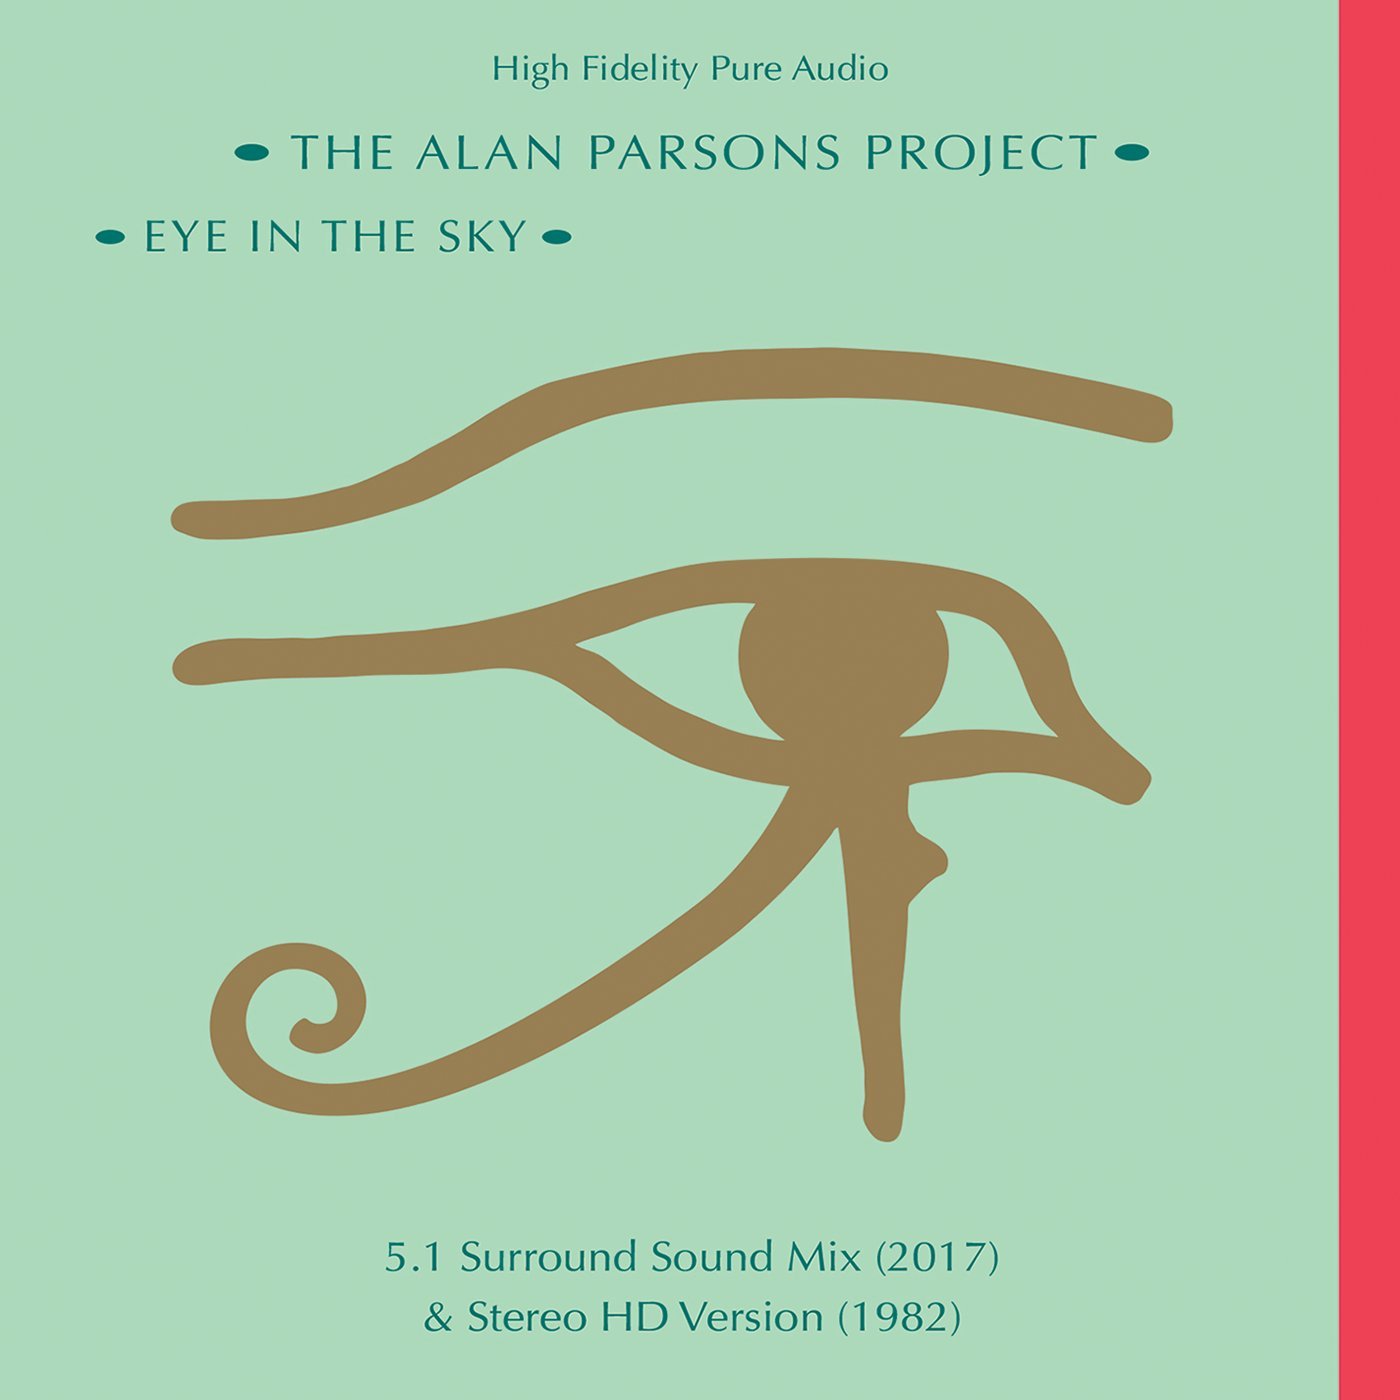 EYE IN THE SKY” 35TH ANNIVERSARY BLU-RAY EDITION | Alan Parsons Live